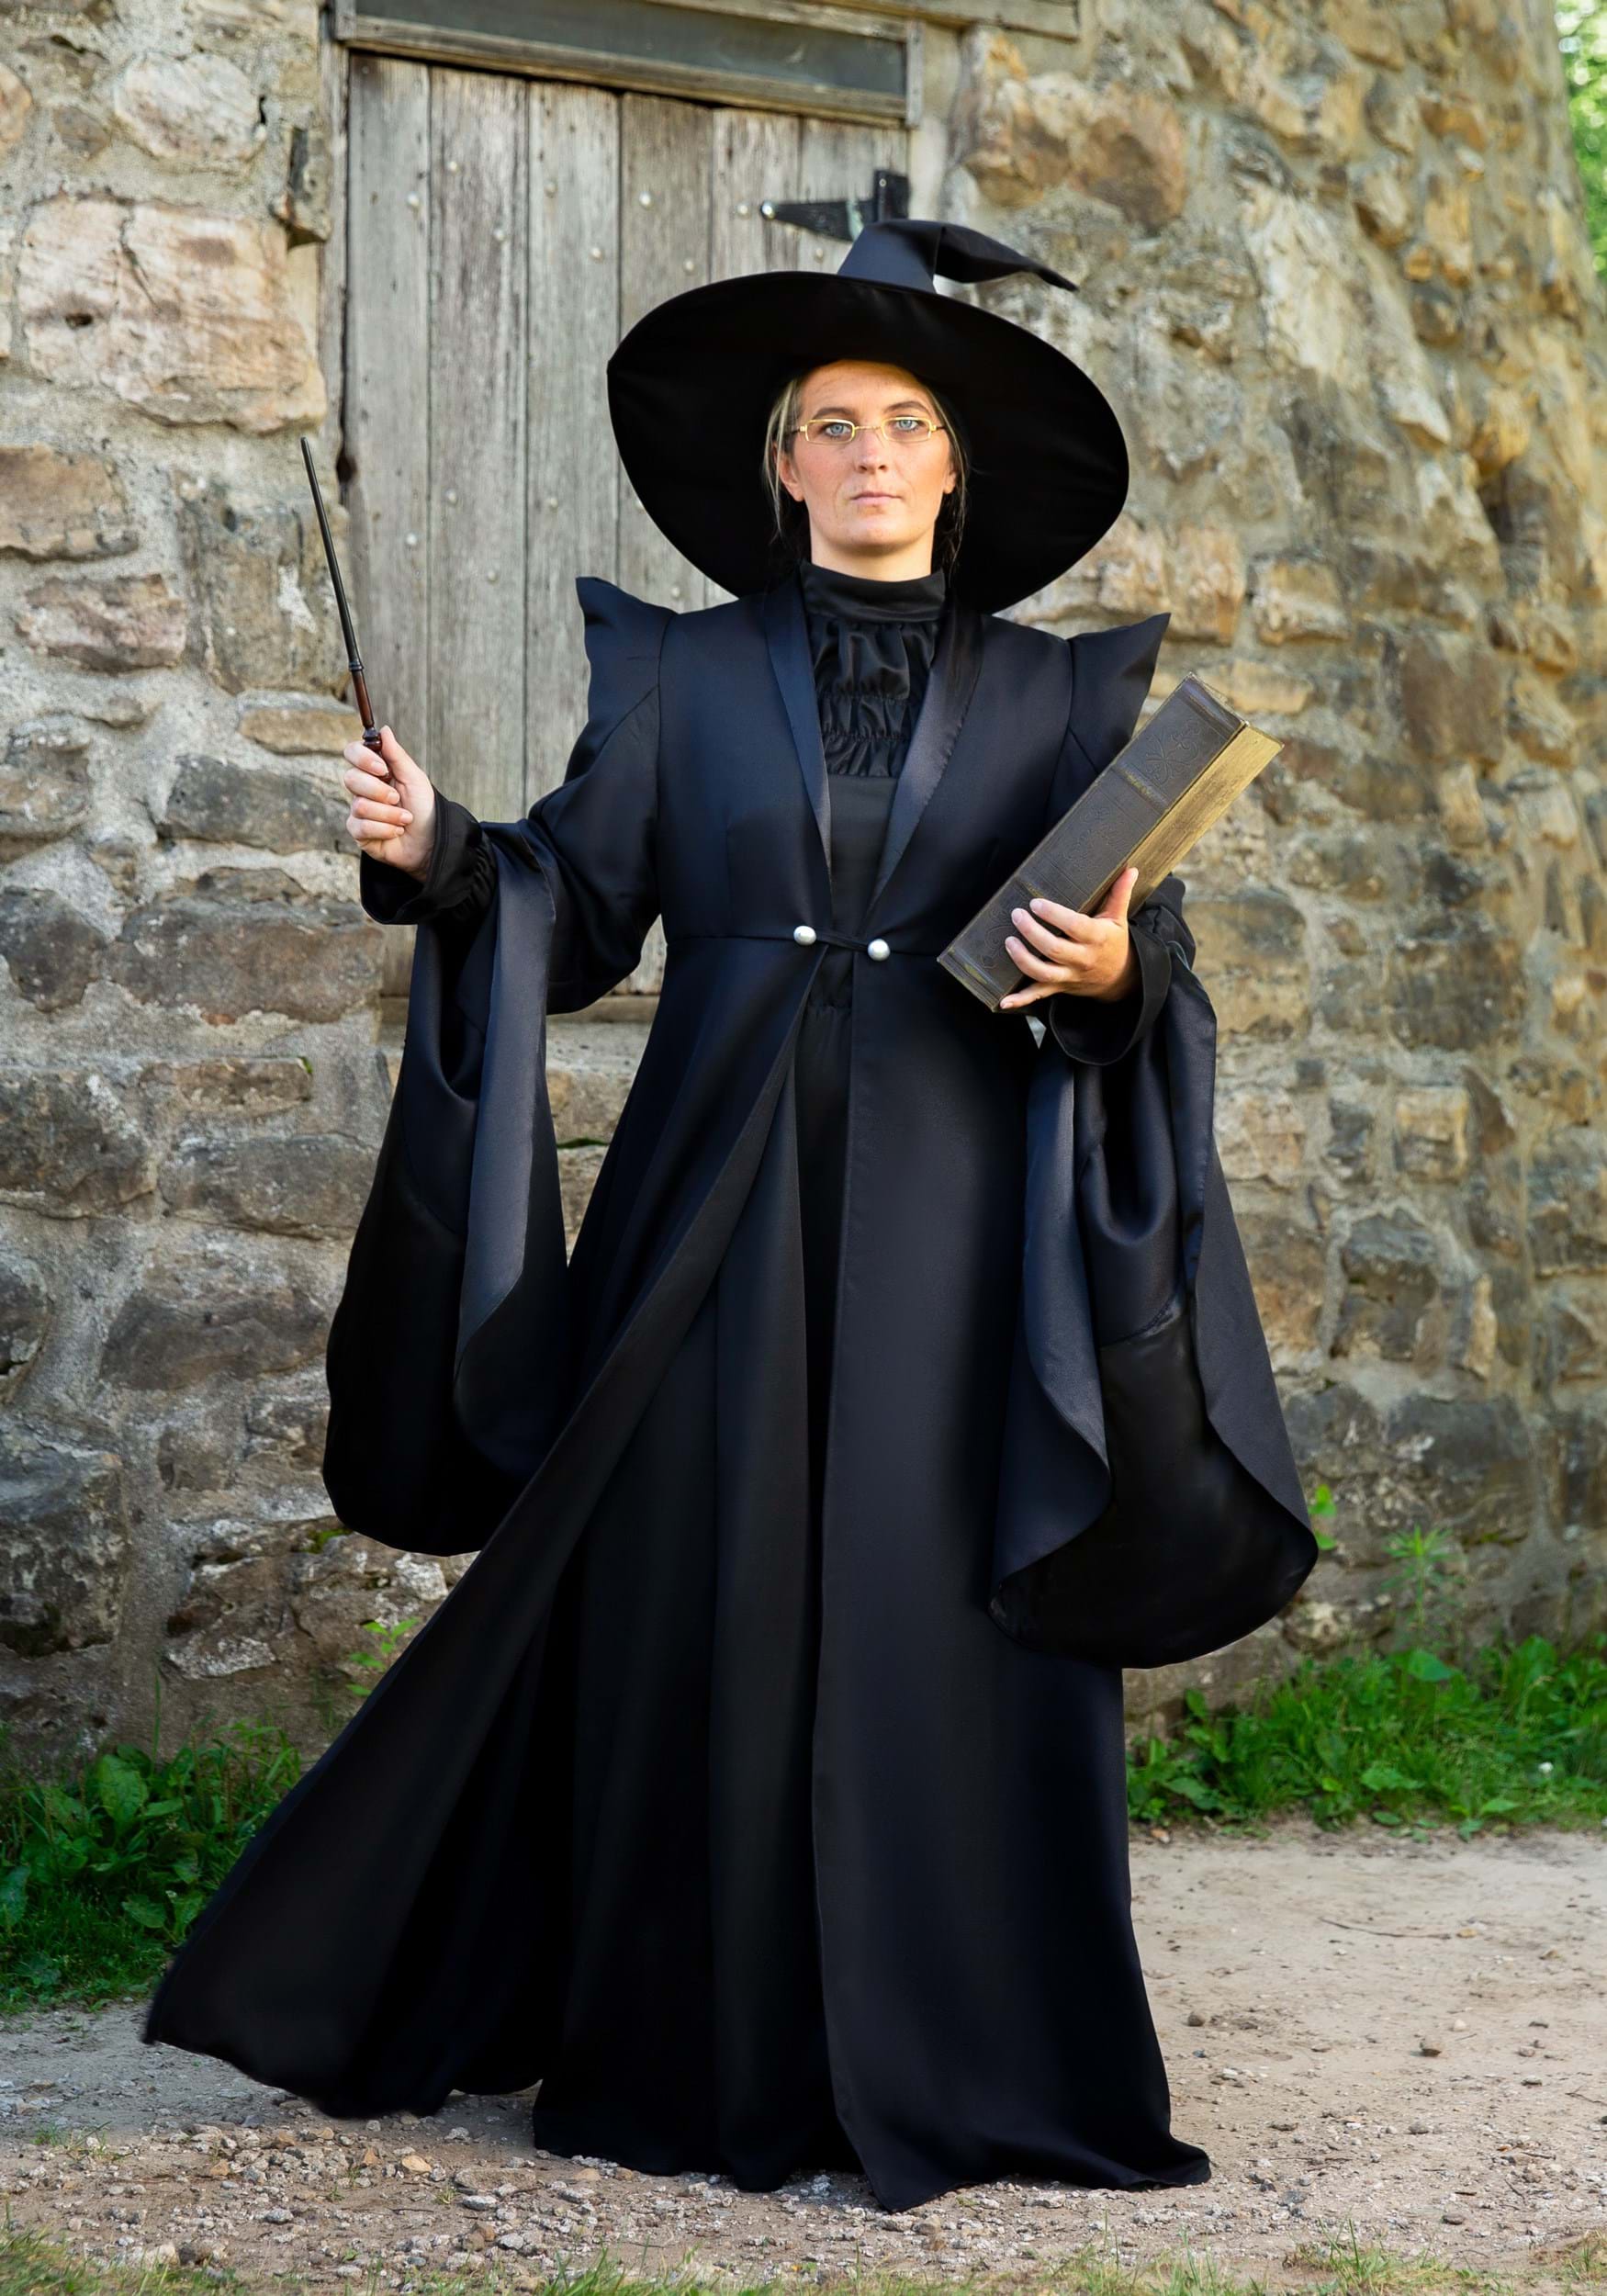 https://images.halloweencostumes.ca/products/64165/1-1/womens-deluxe-harry-potter-mcgonagall-costume.jpg